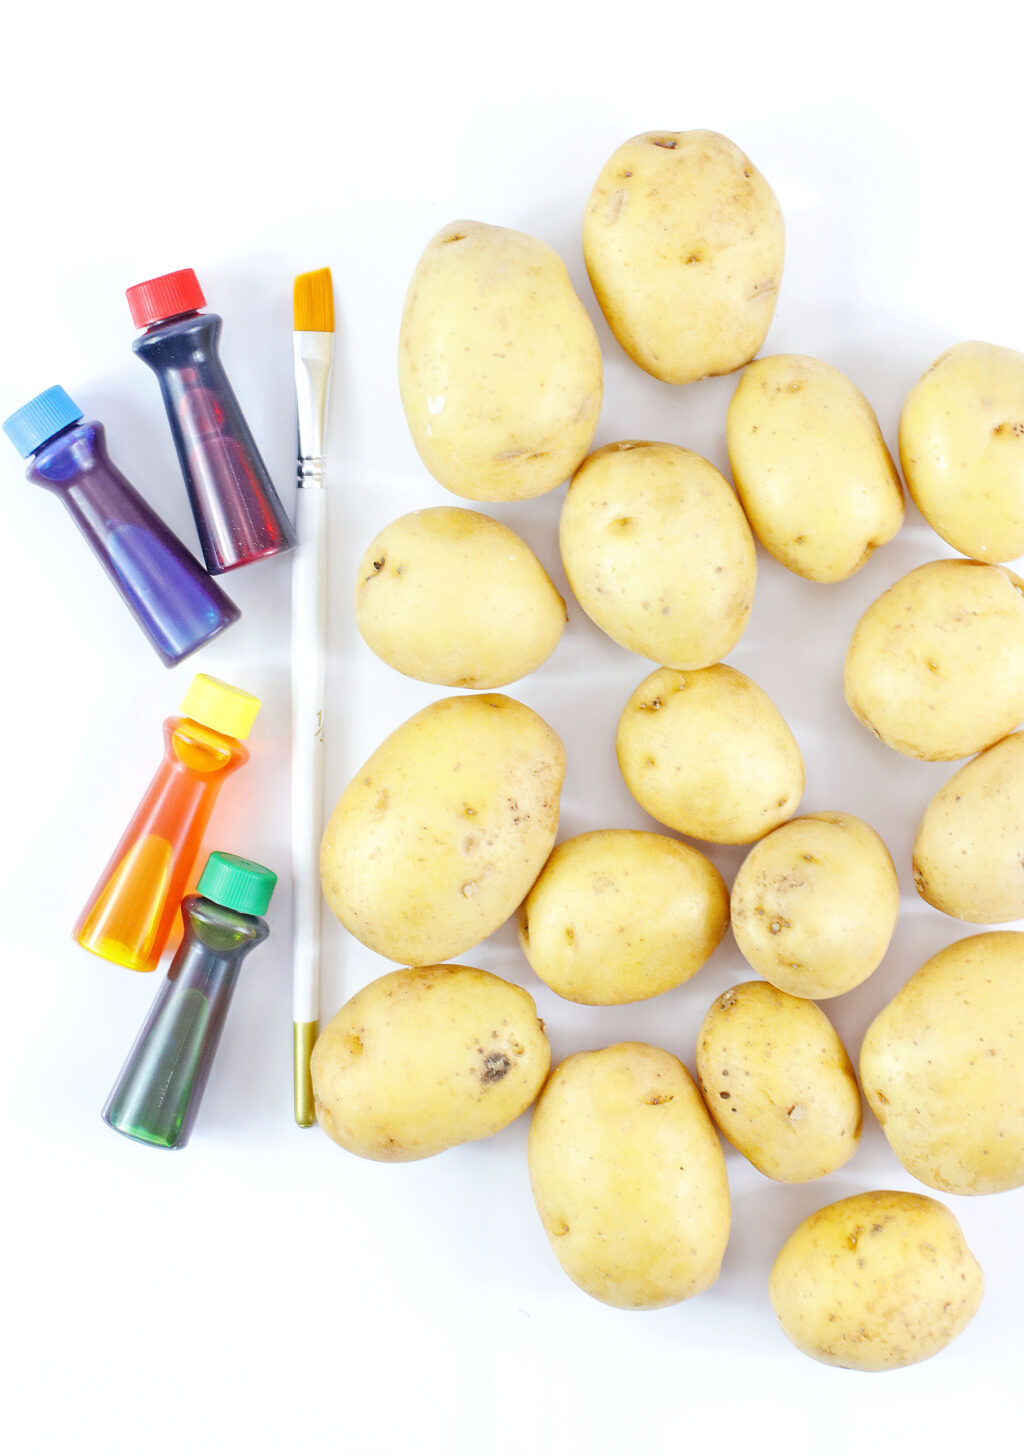 yellow potatoes with regular food coloring and a paintbrush next to it on a white table